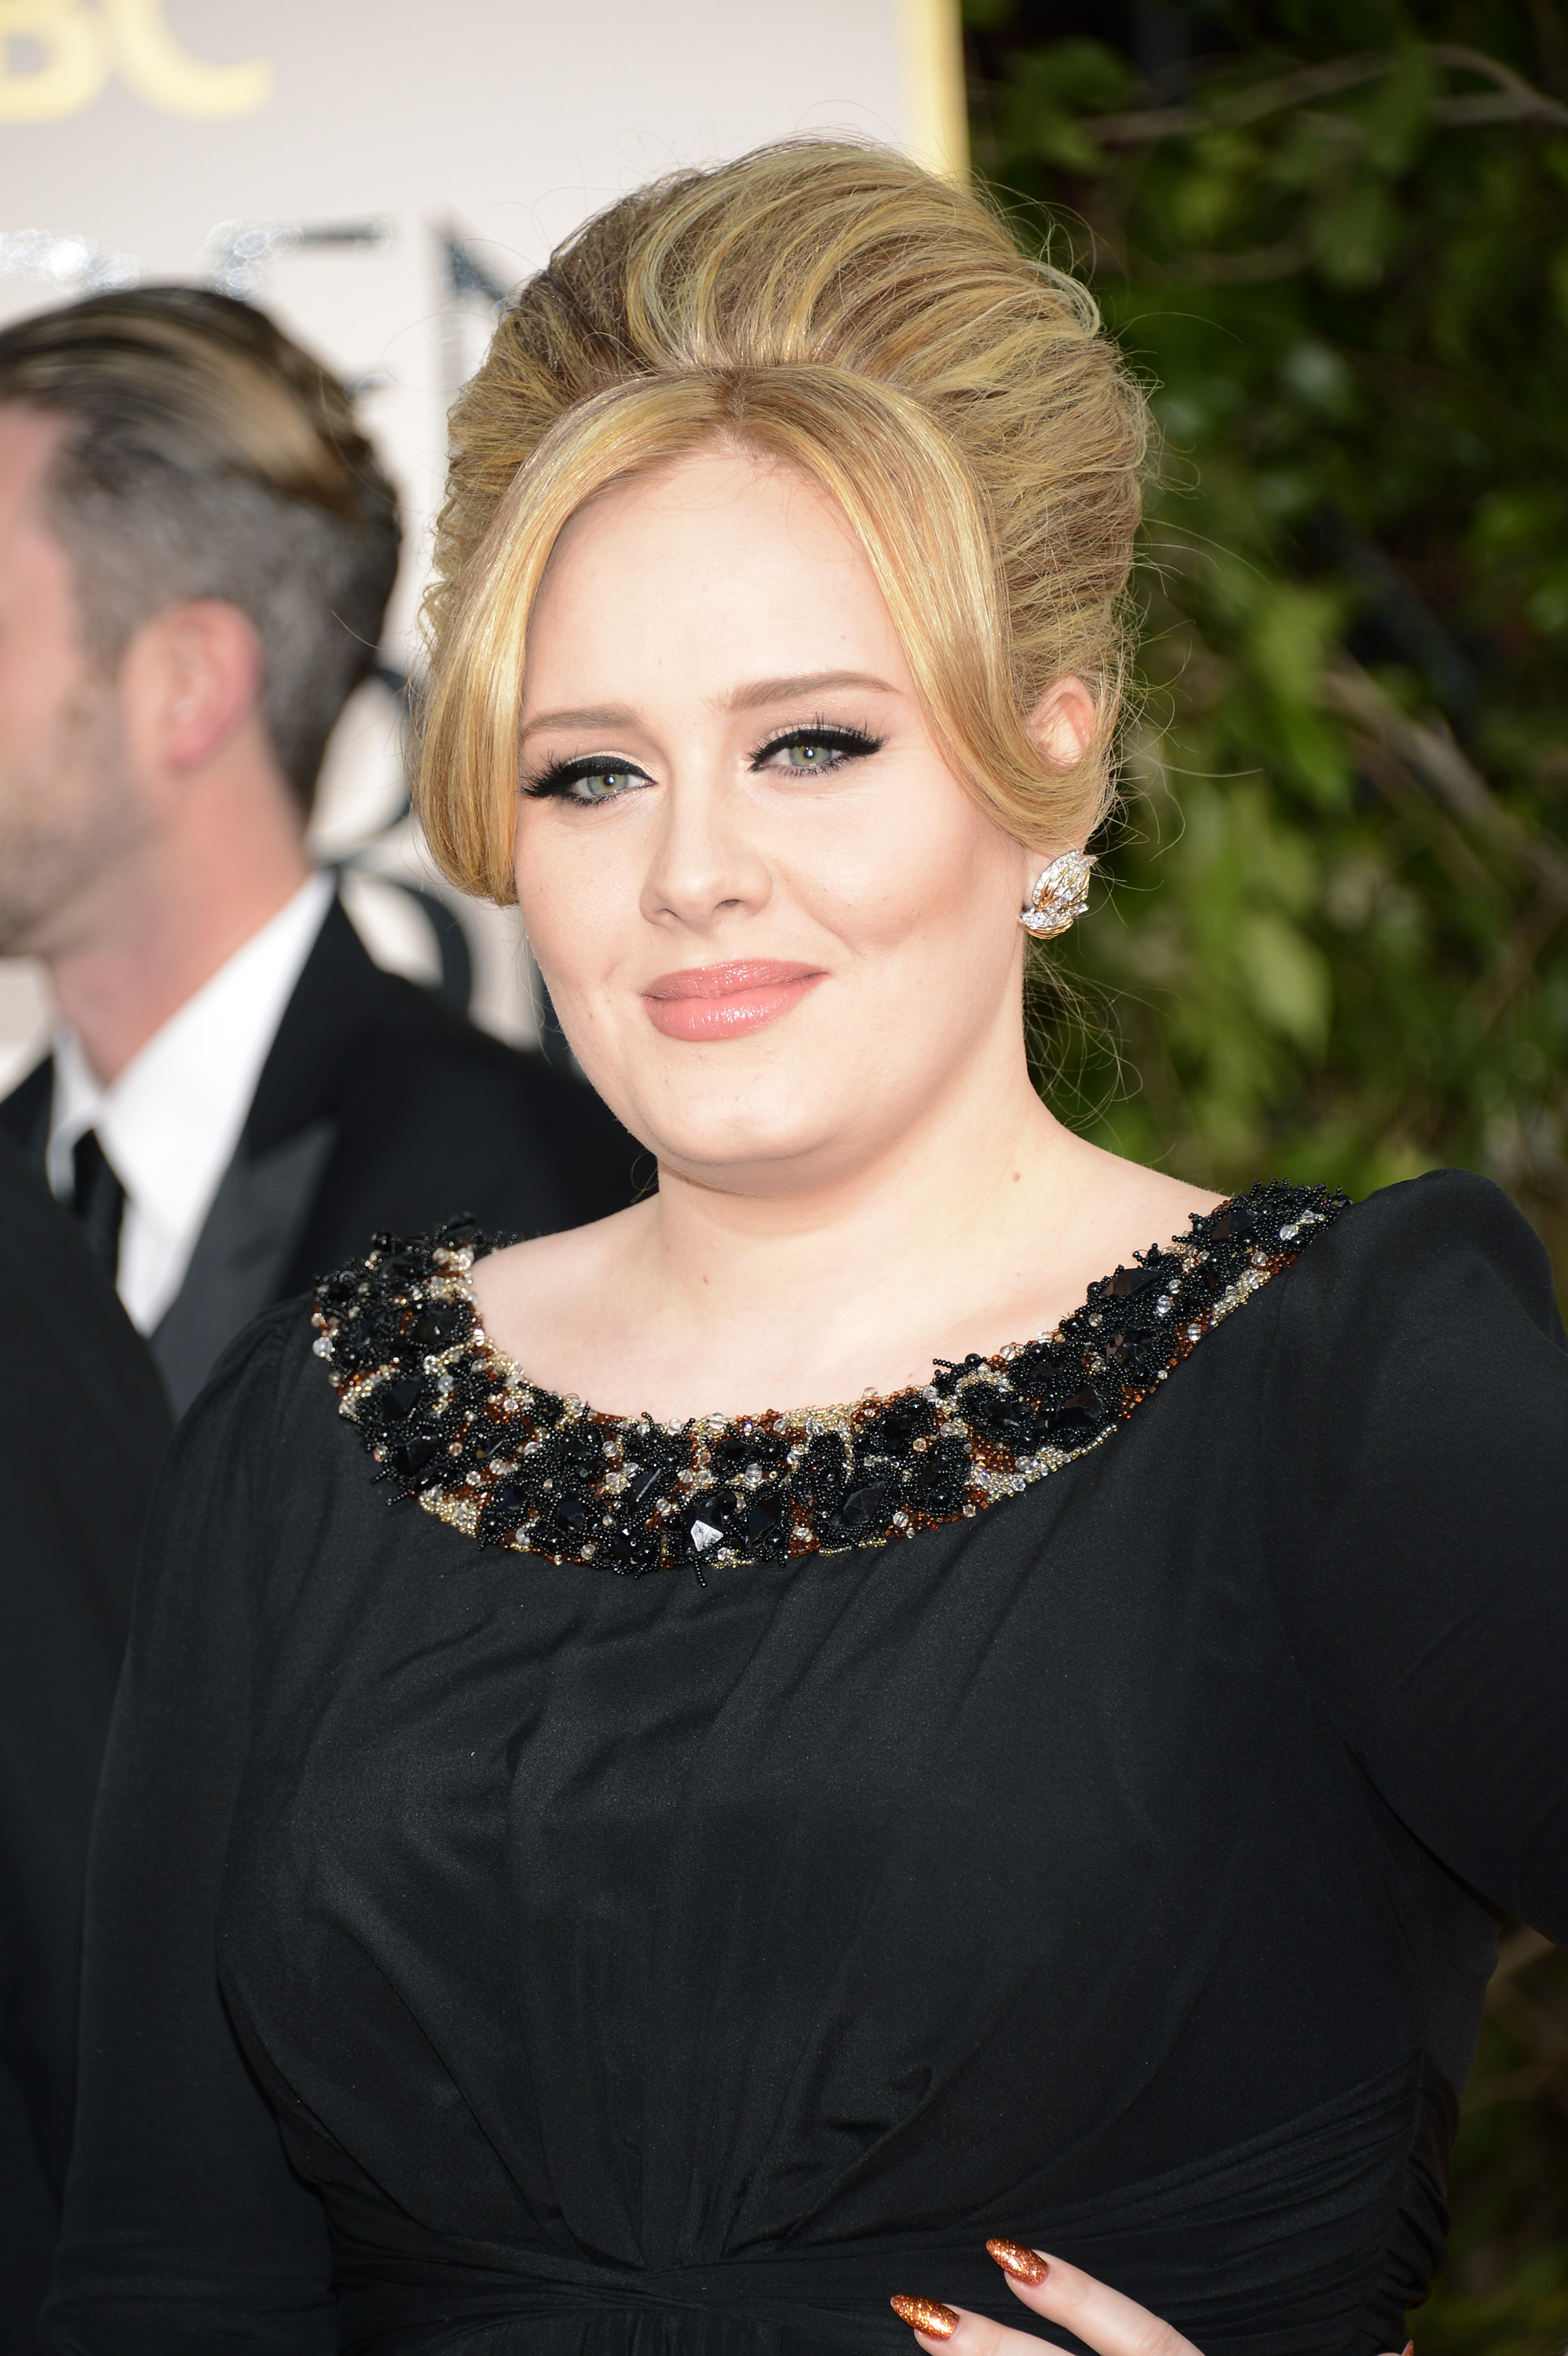 Adele at the 70th Annual Golden Globe Awards on January 13, 2013, in Beverly Hills, California | Source : Getty Images